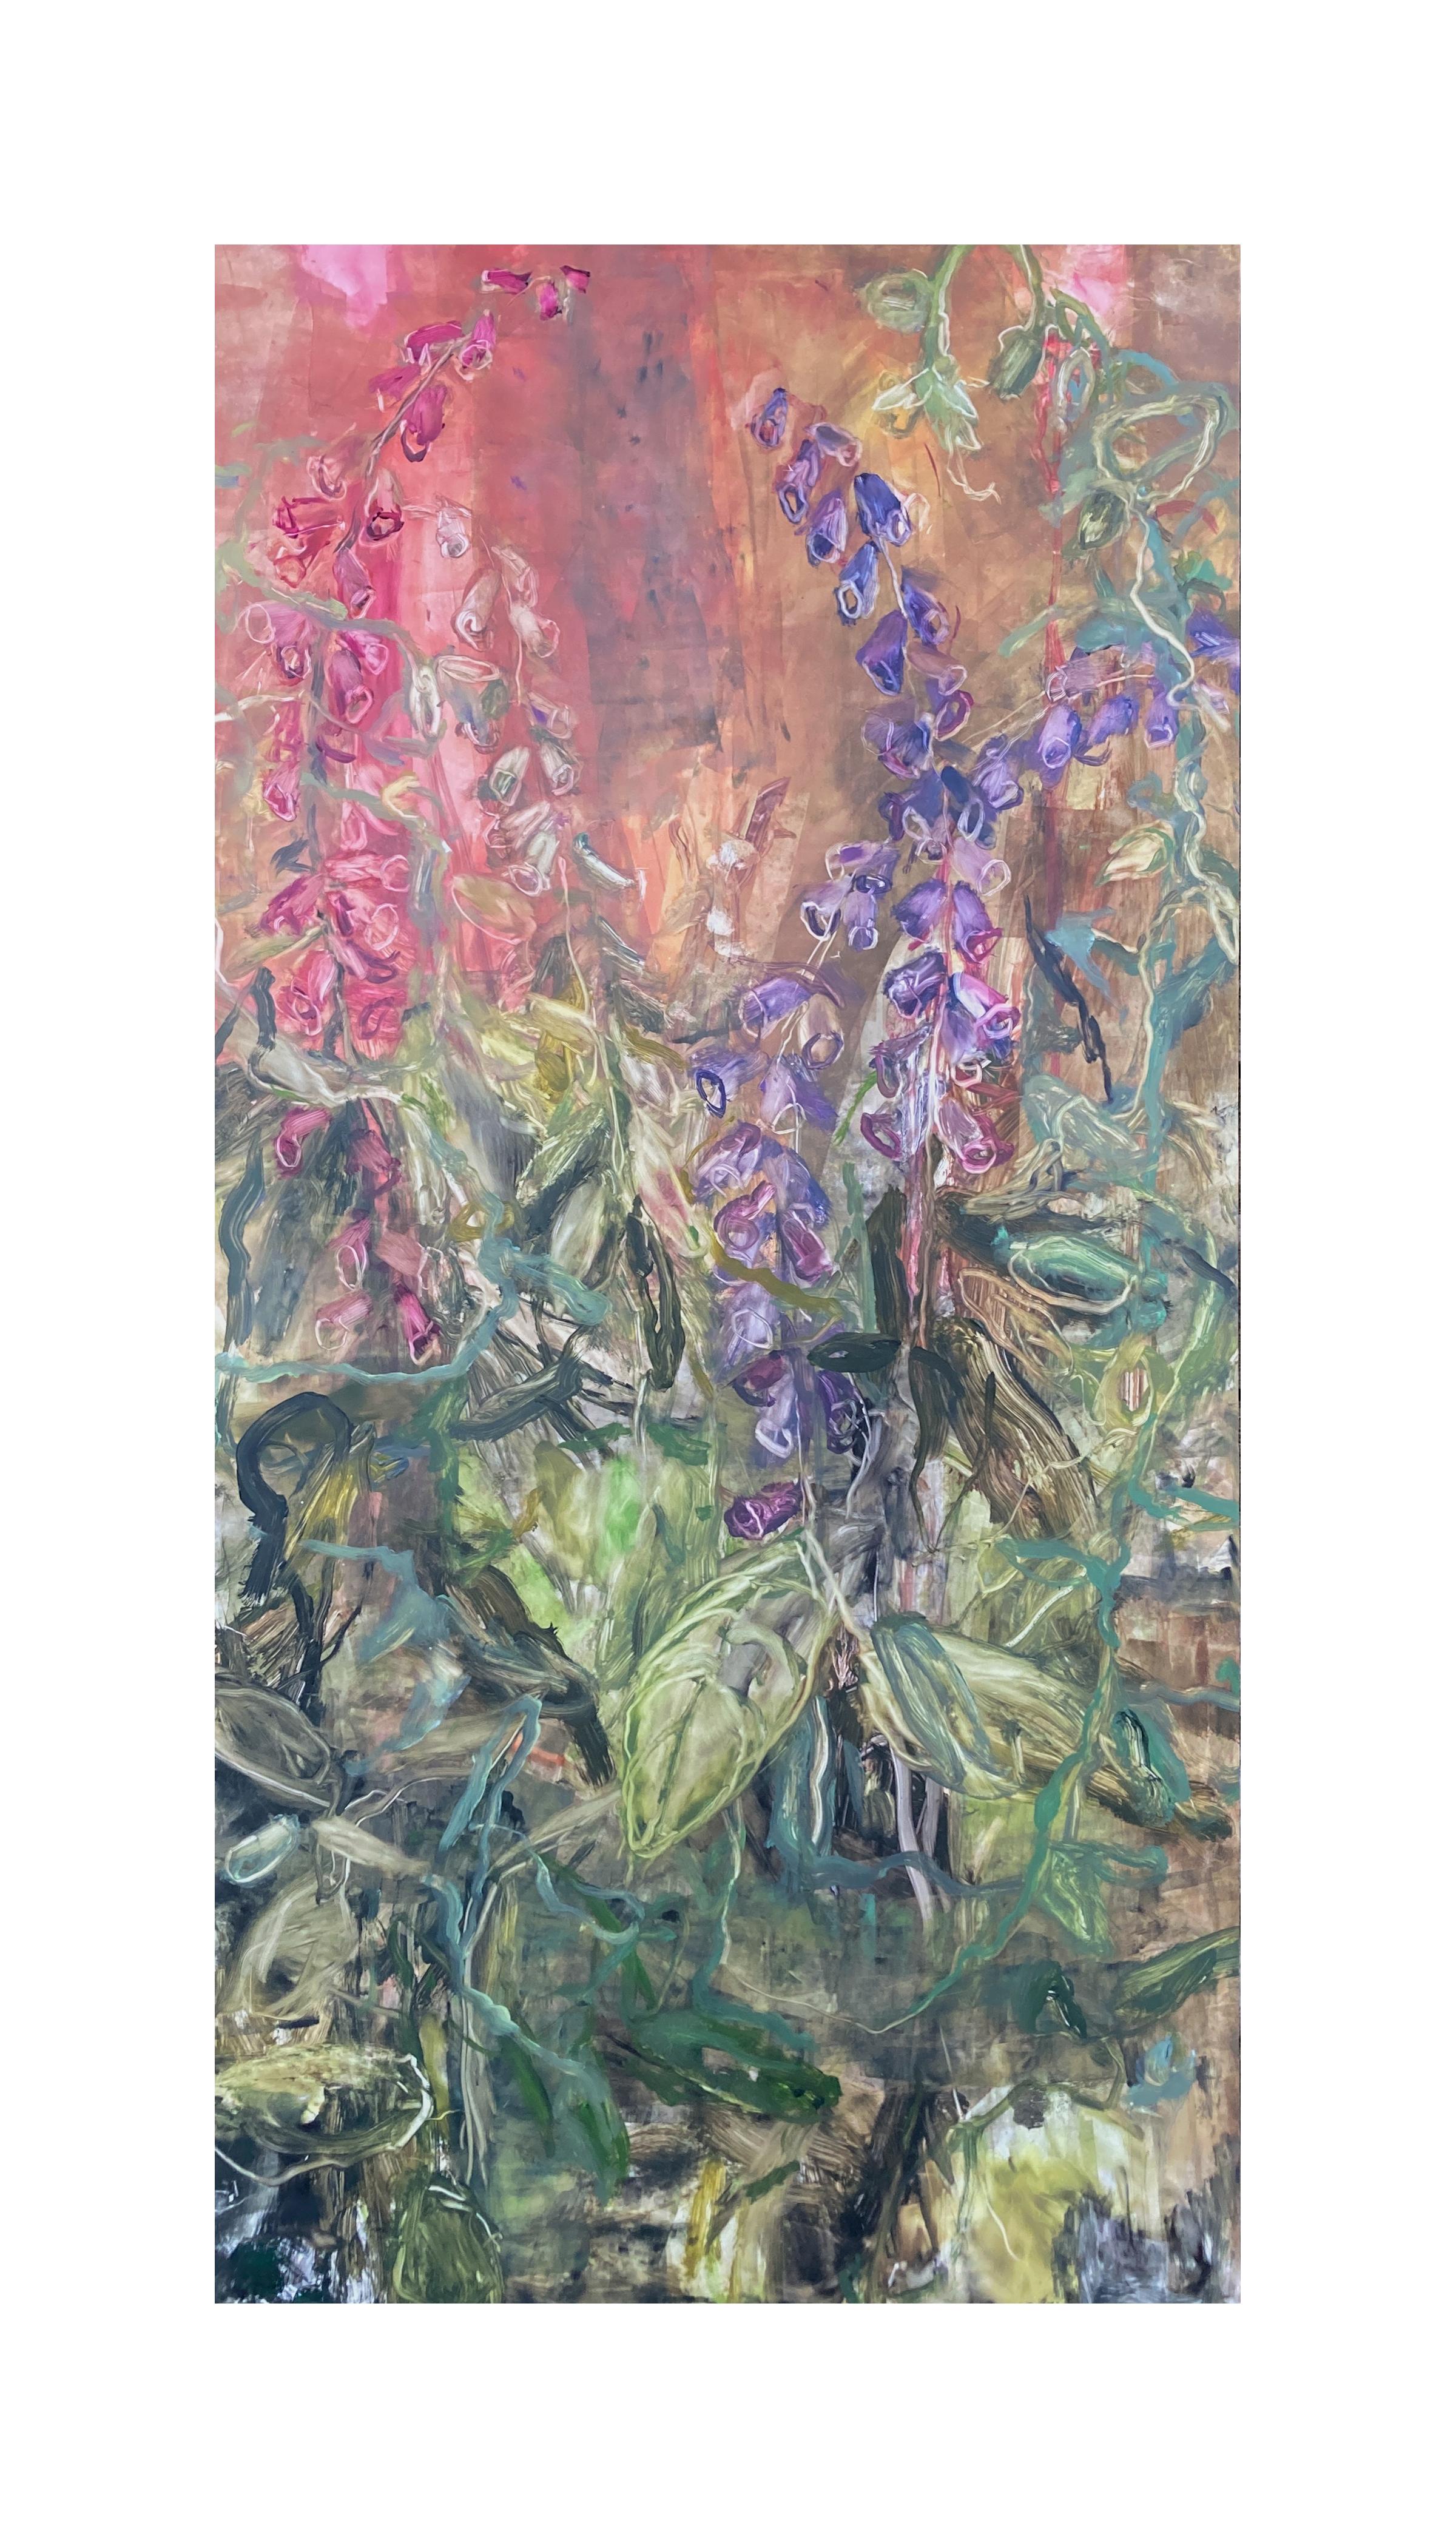 Liza Clement Figurative Painting - FOXGLOVE #4 - Oil on Yupo Panel Painting of Plant Life in the Forest